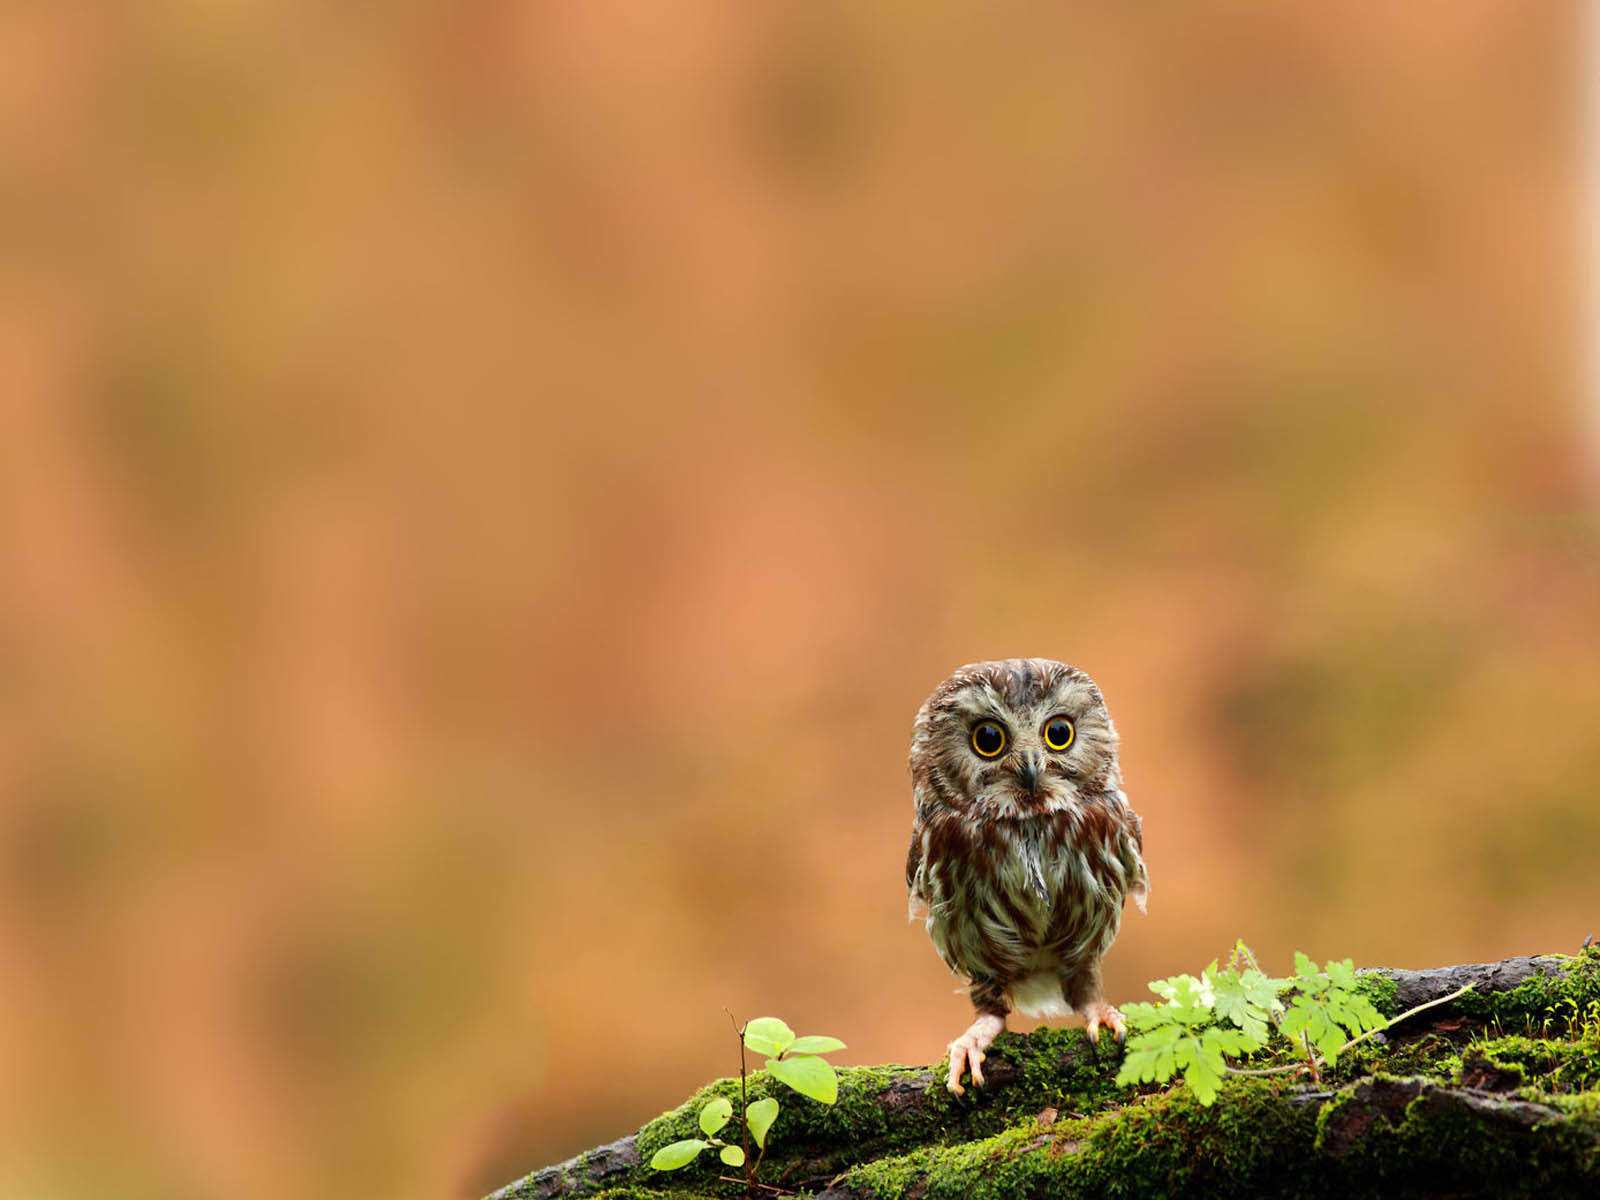  funny owl wallpapers images photos pictures and backgrounds for free